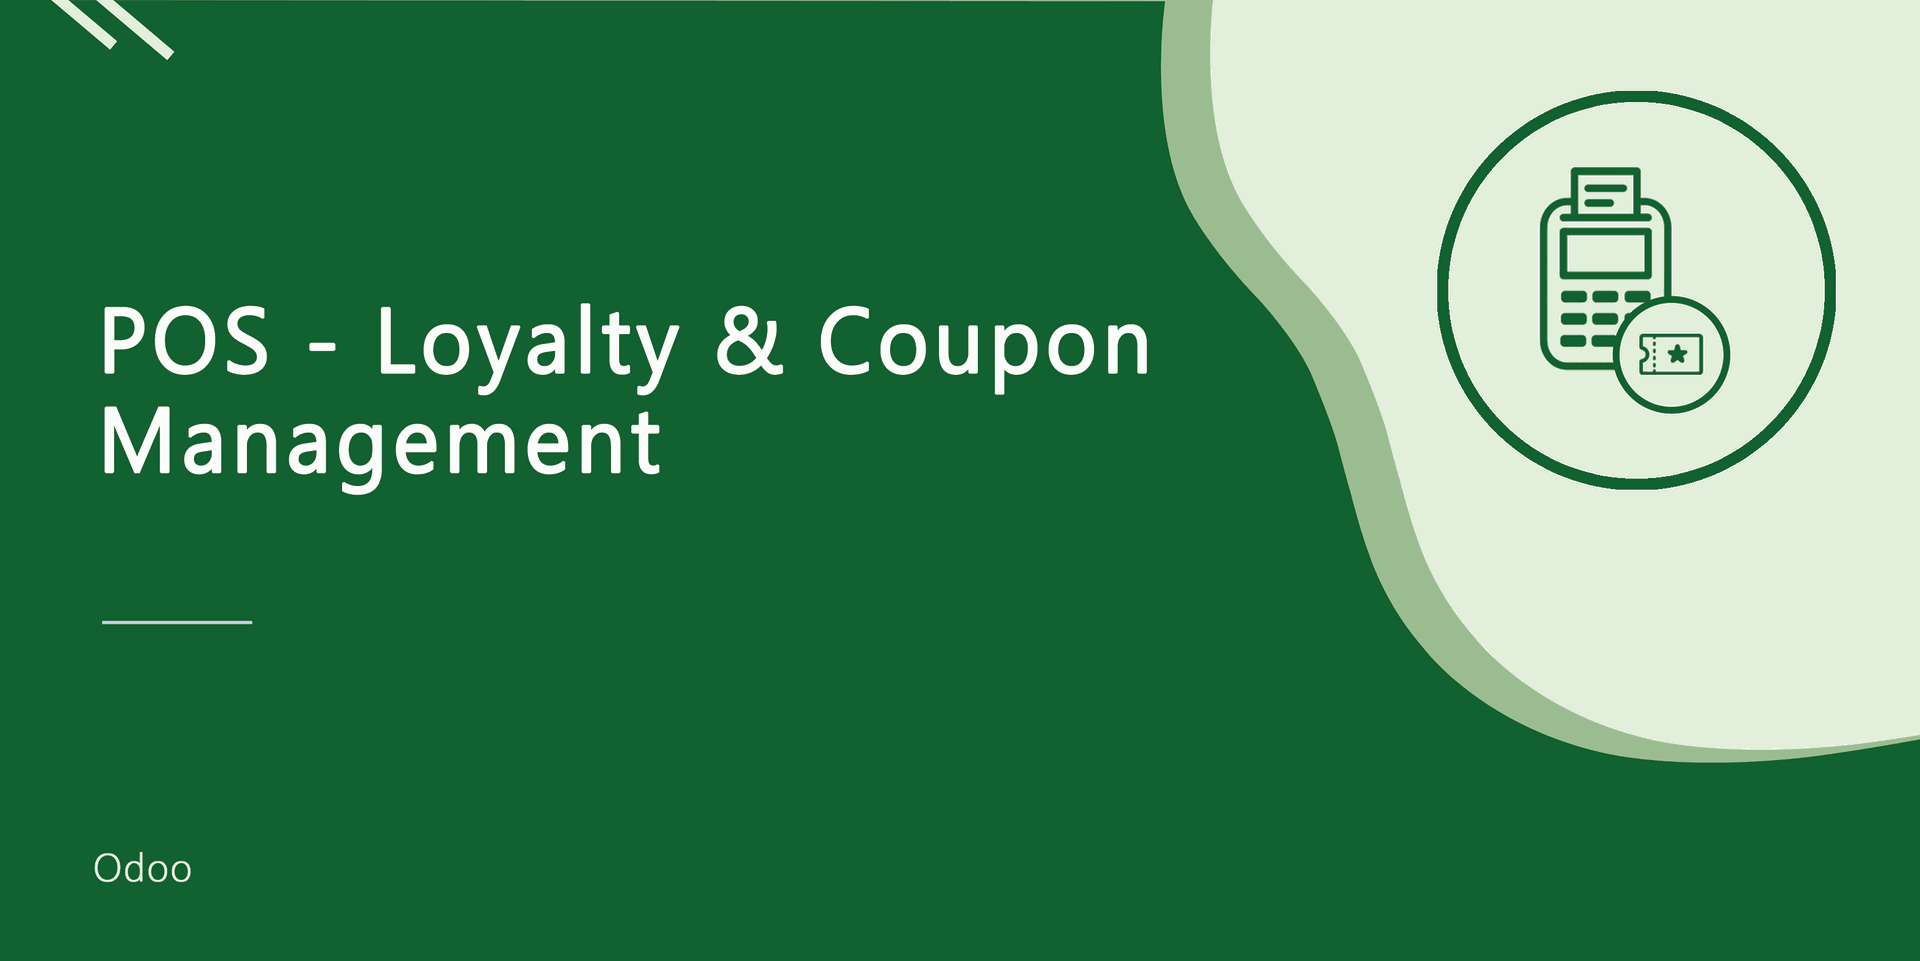 Point Of Sale Order - Loyalty and Coupon Management